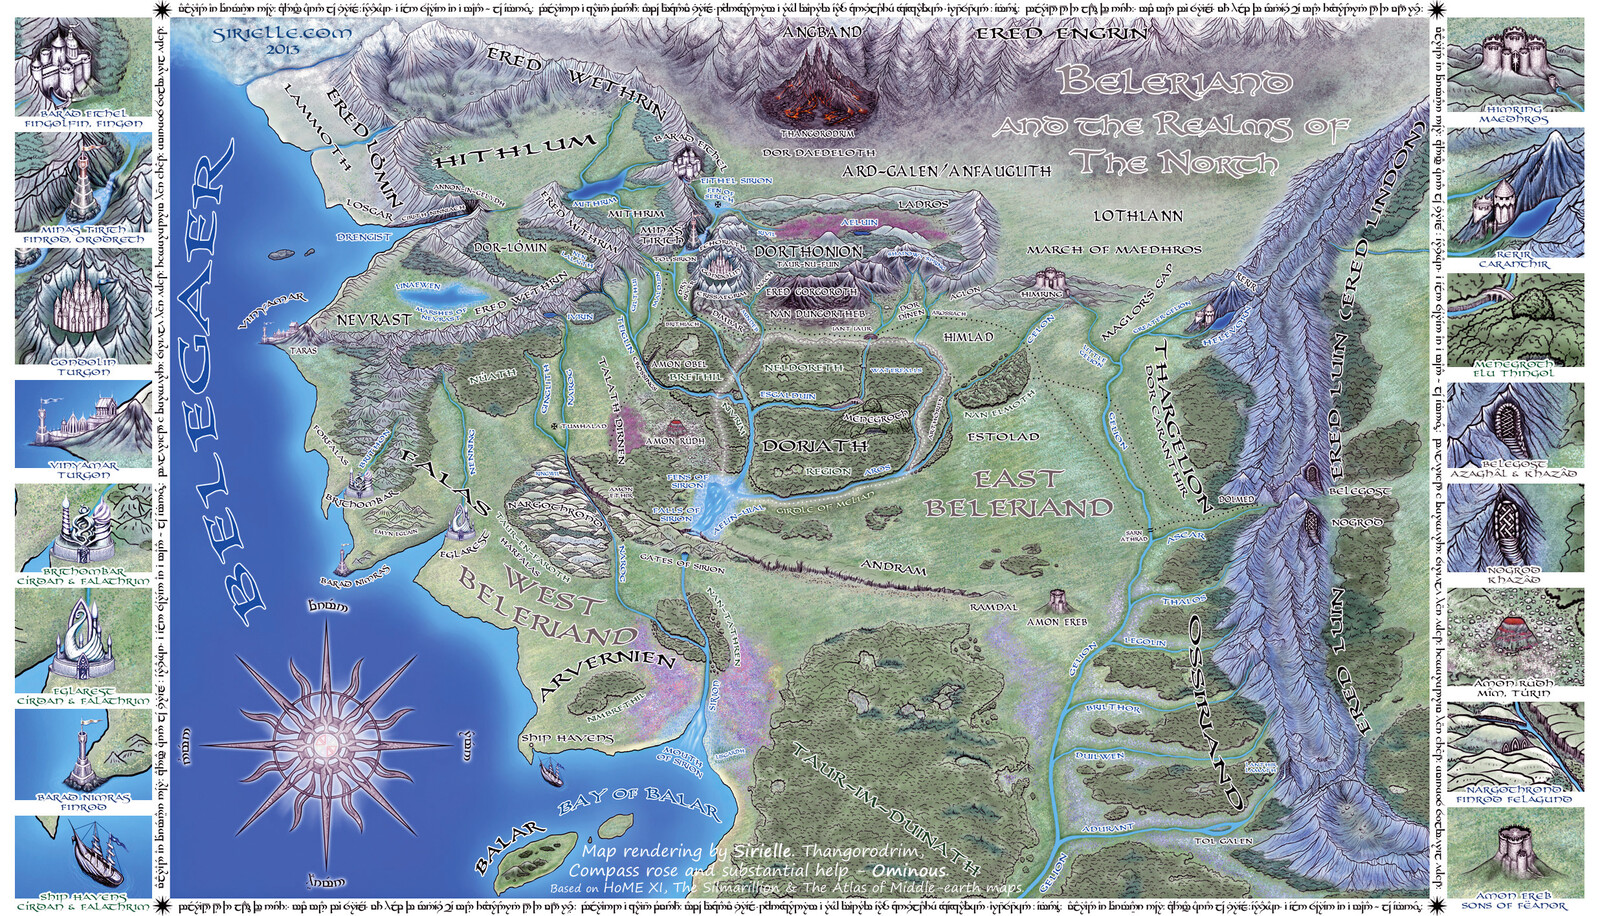 Beleriand and Realms of The North | Map rendering by myself, with Thangorodrim, compass rose and tengwar frame by Kuba Tymiński 'Ominous'.